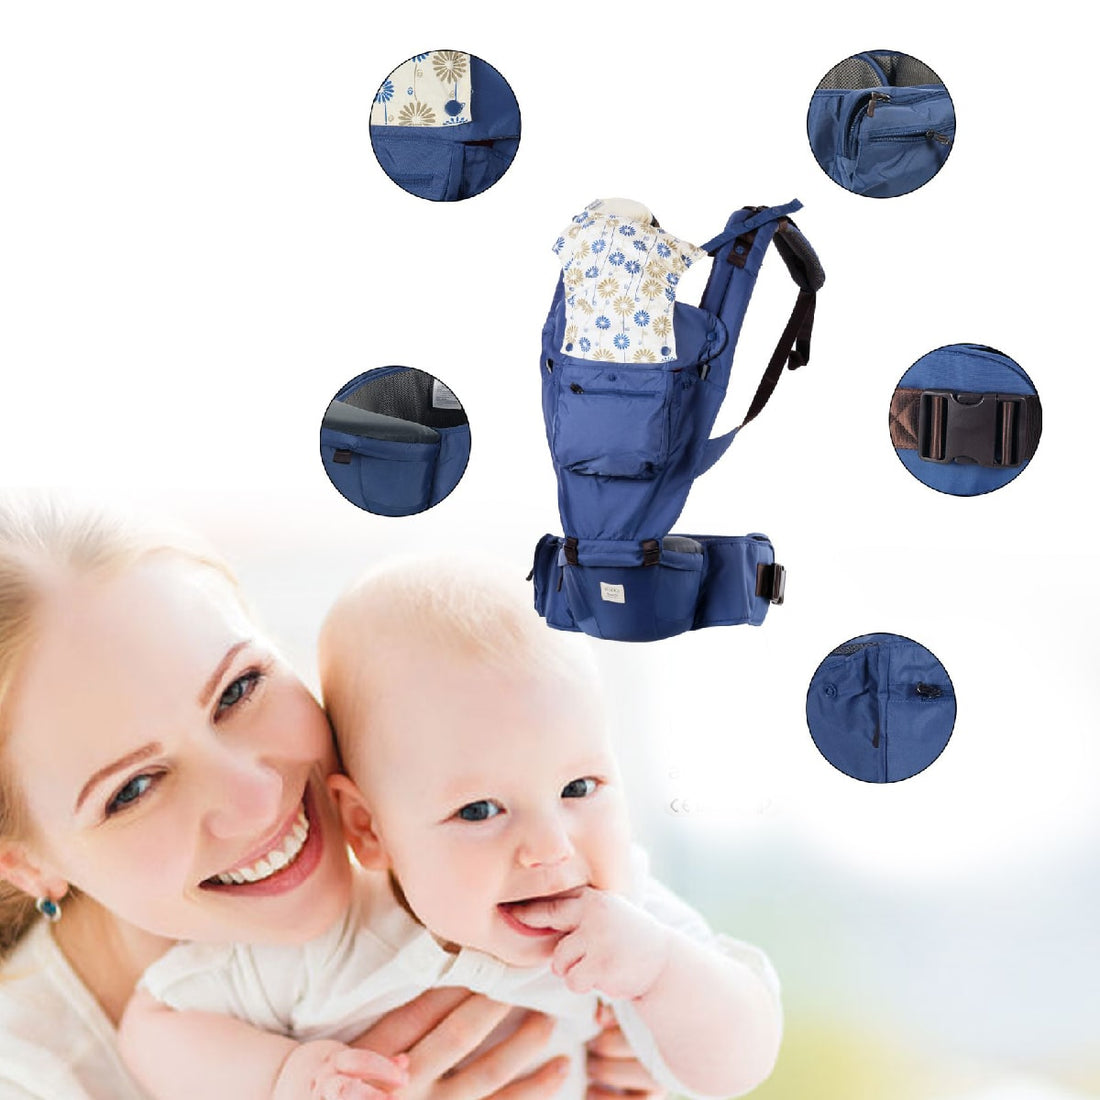 Are Baby Carriers safe to use?